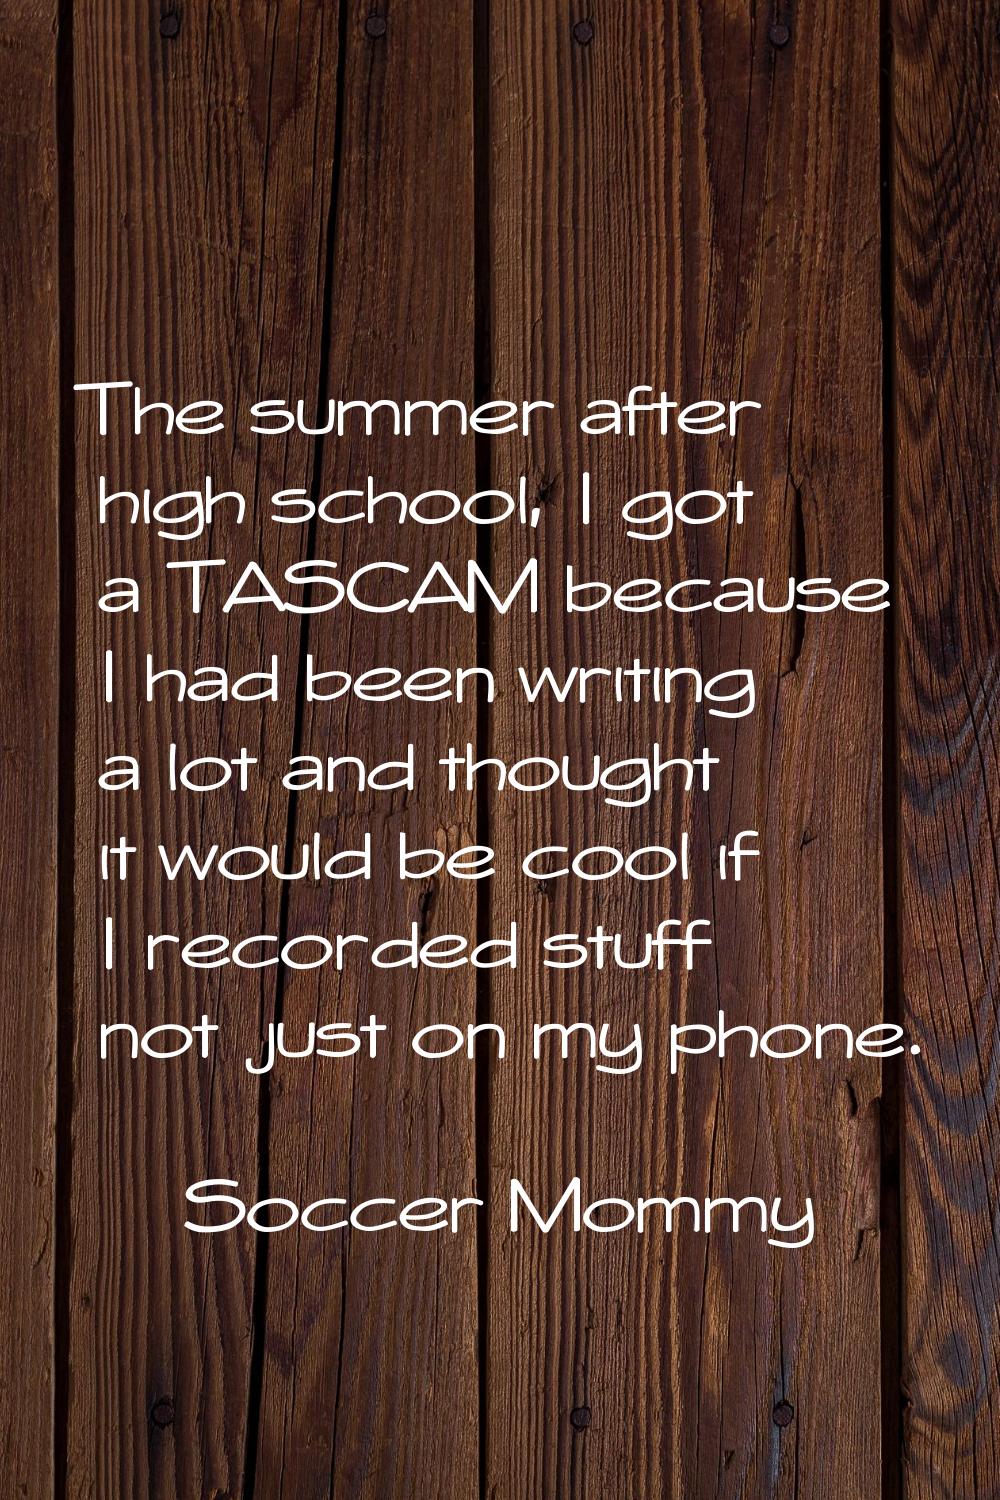 The summer after high school, I got a TASCAM because I had been writing a lot and thought it would 